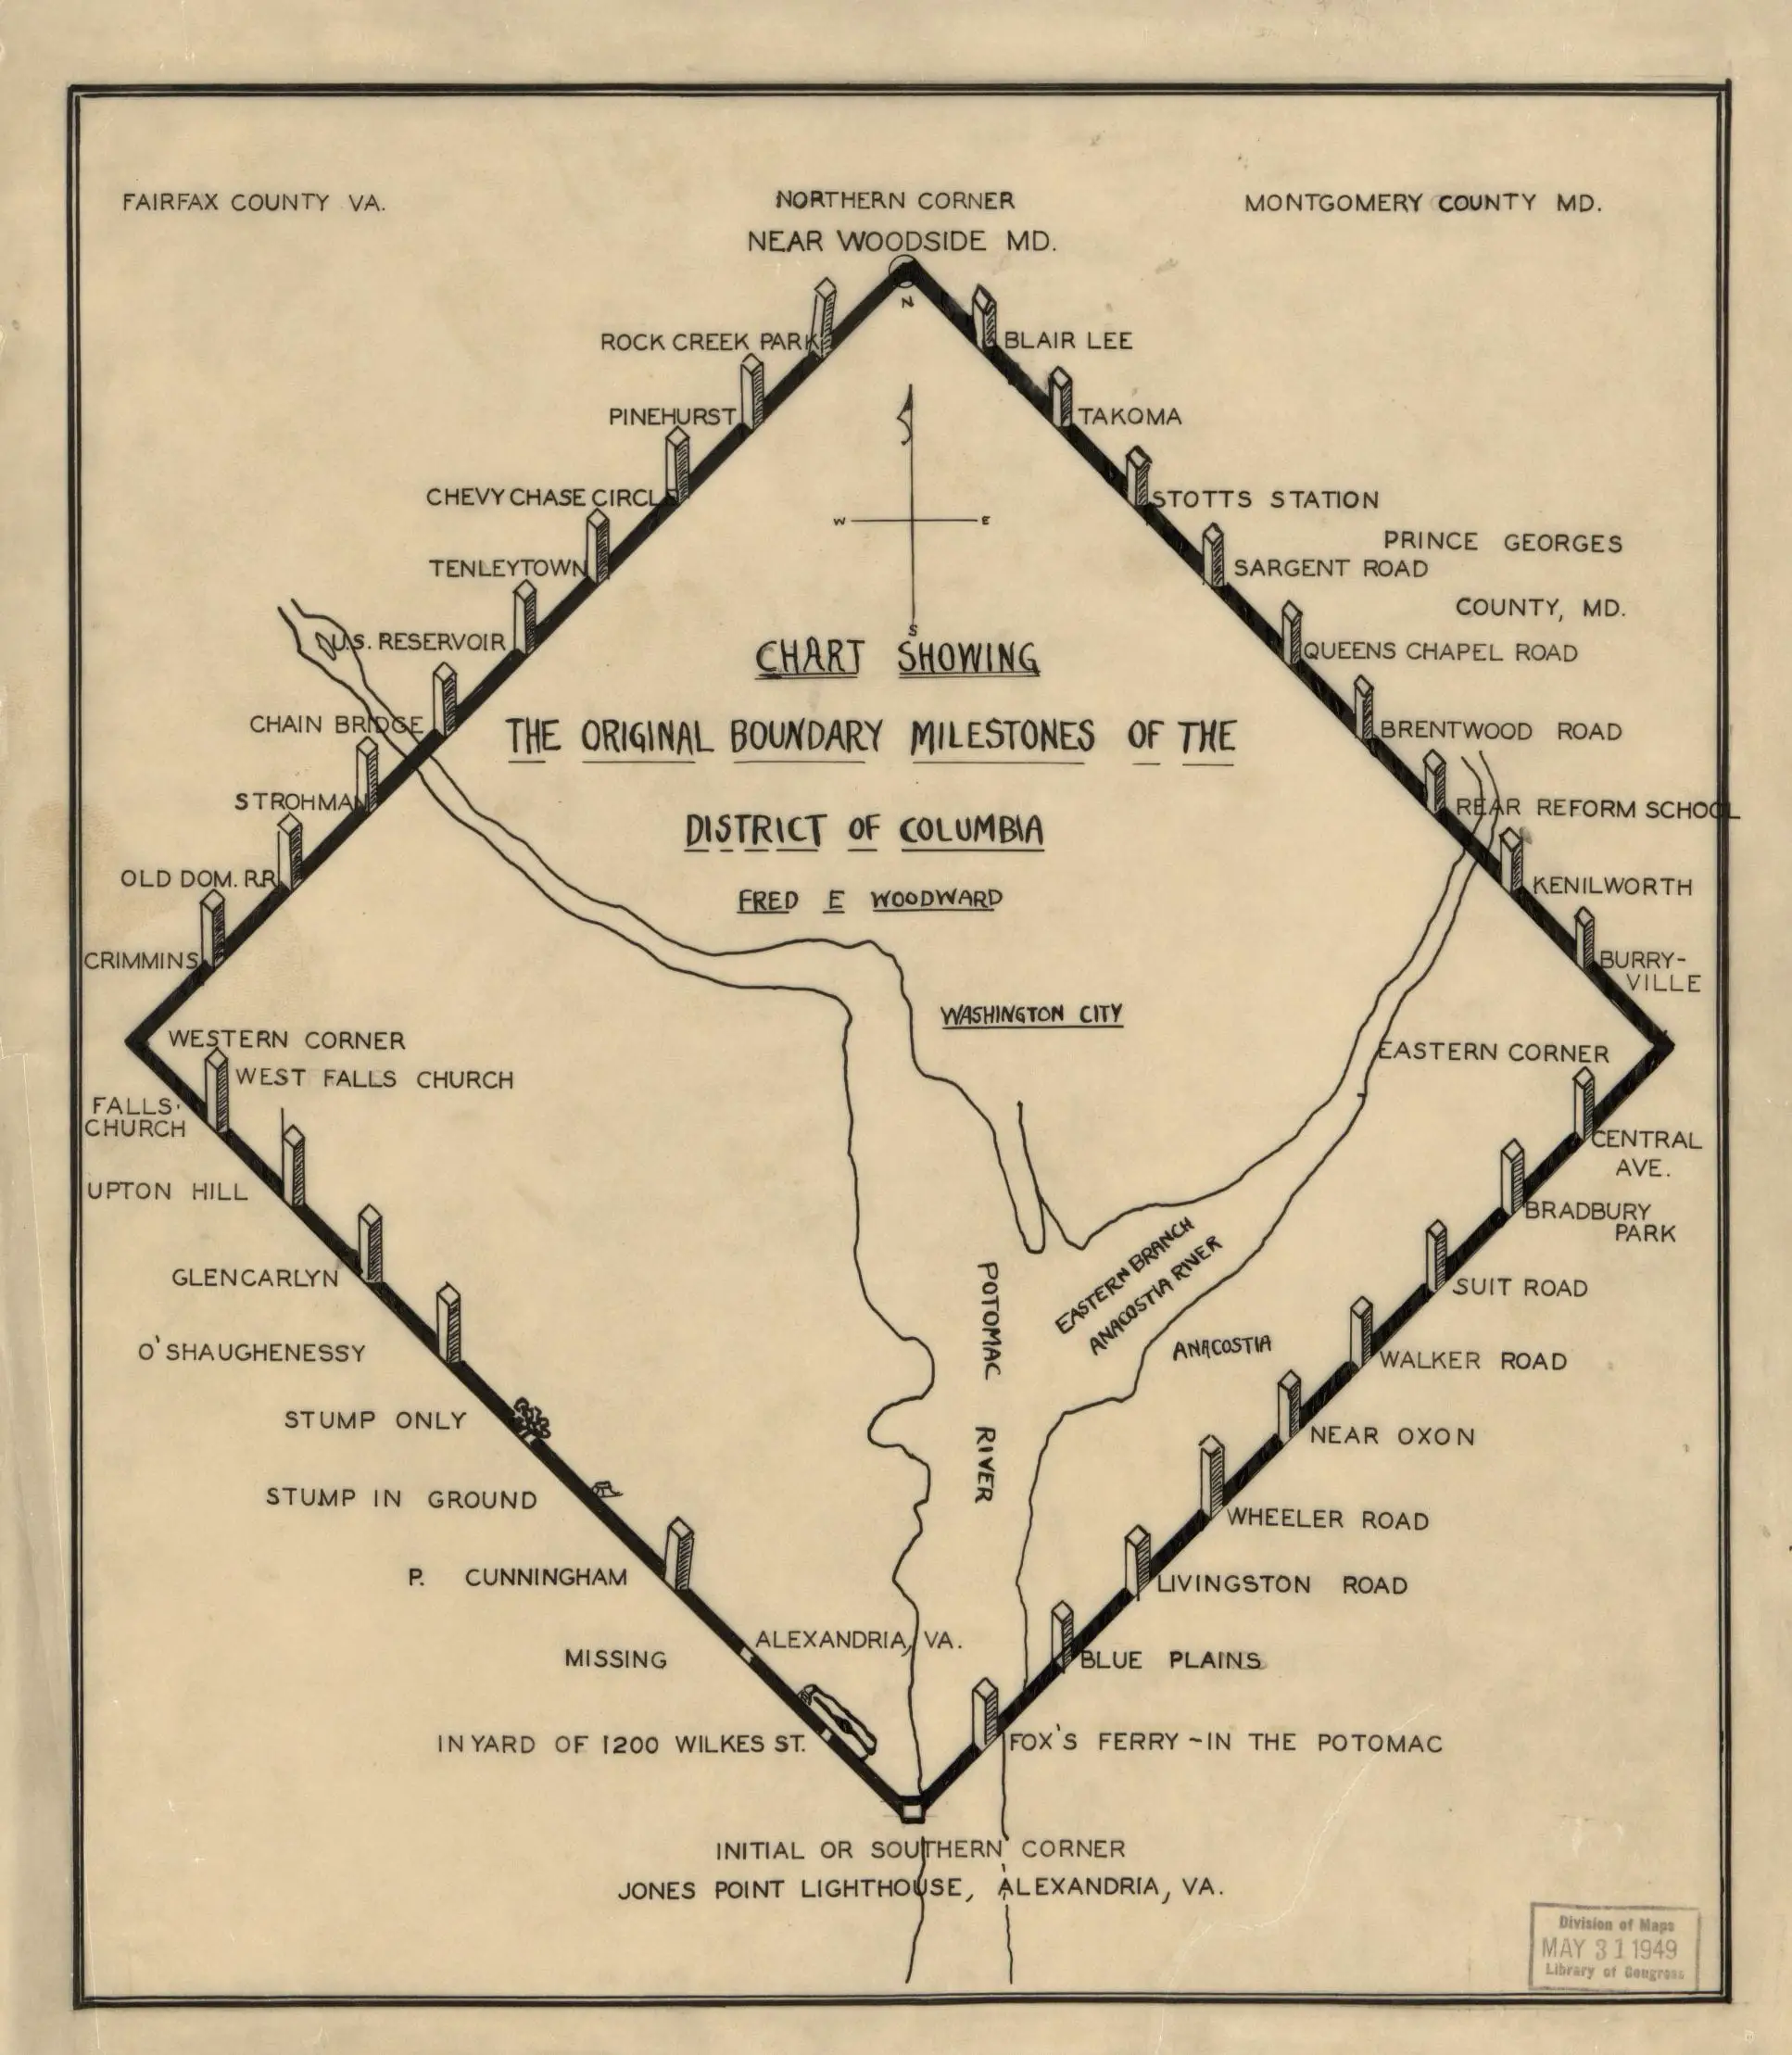 1906 map showing the original boundary milestones of the District of Columbia